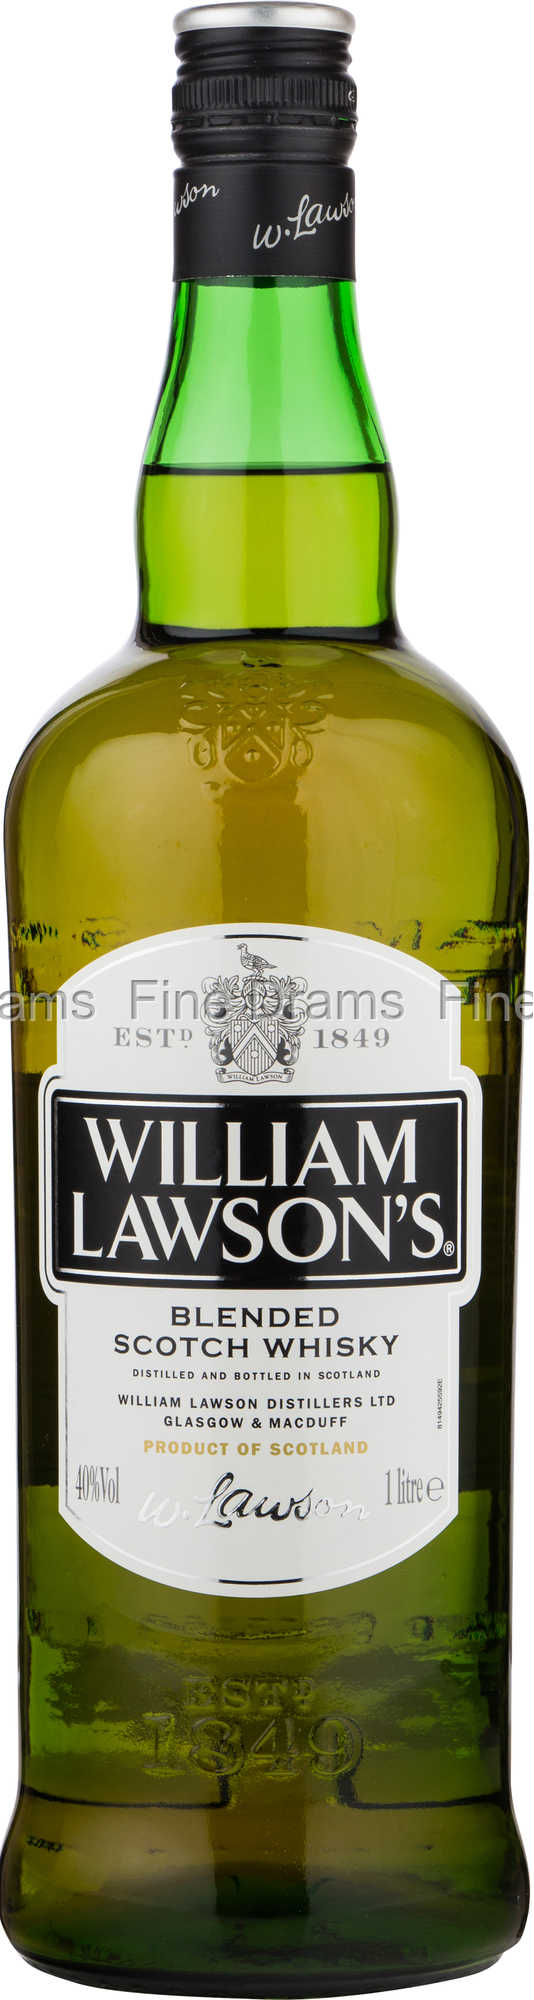 William Lawson's 13 Year Old Whisky